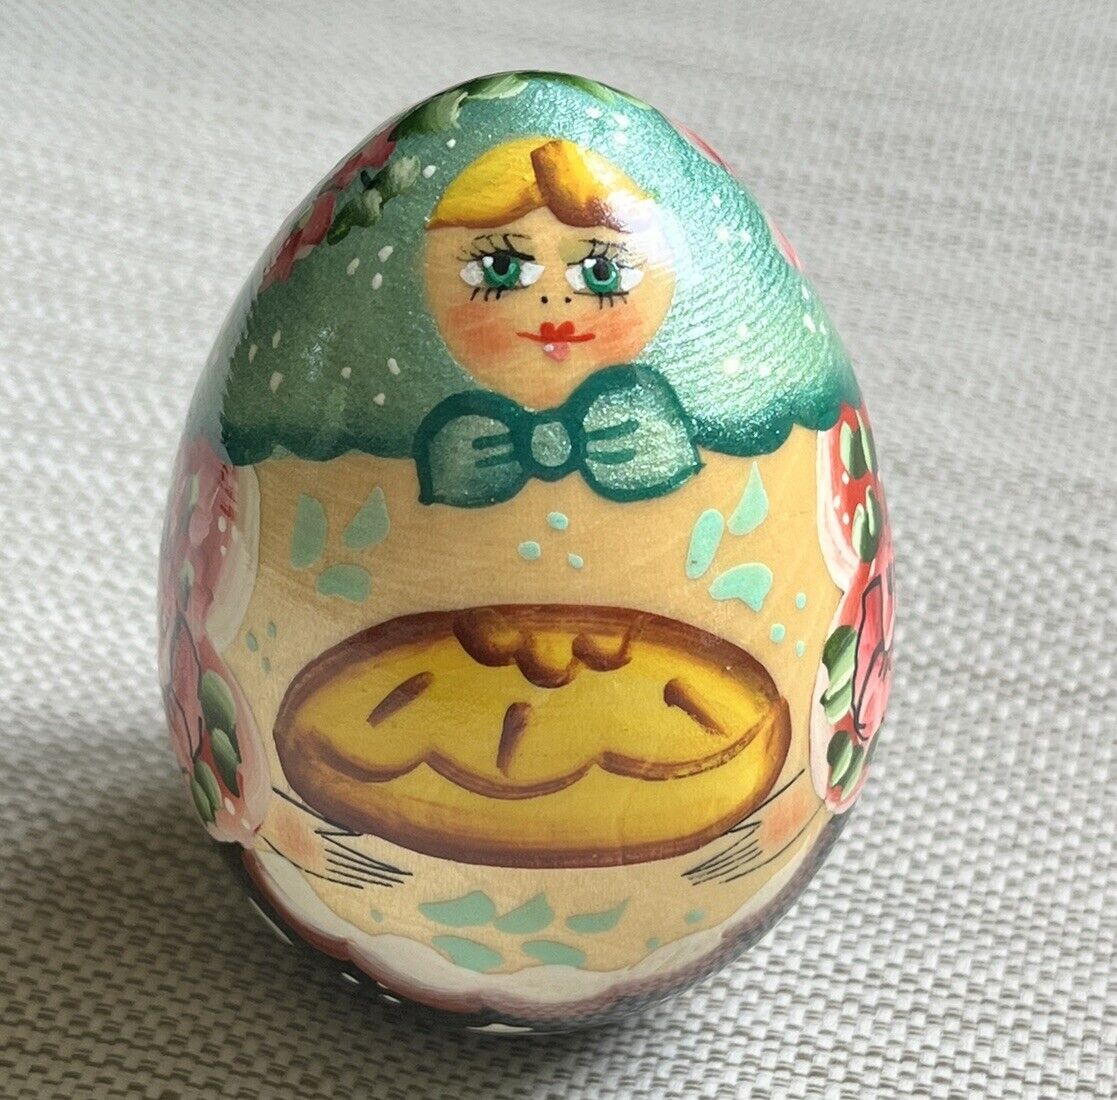 Vintage Hand Painted Russian Egg Wooden Woman Holding A Pie Baker